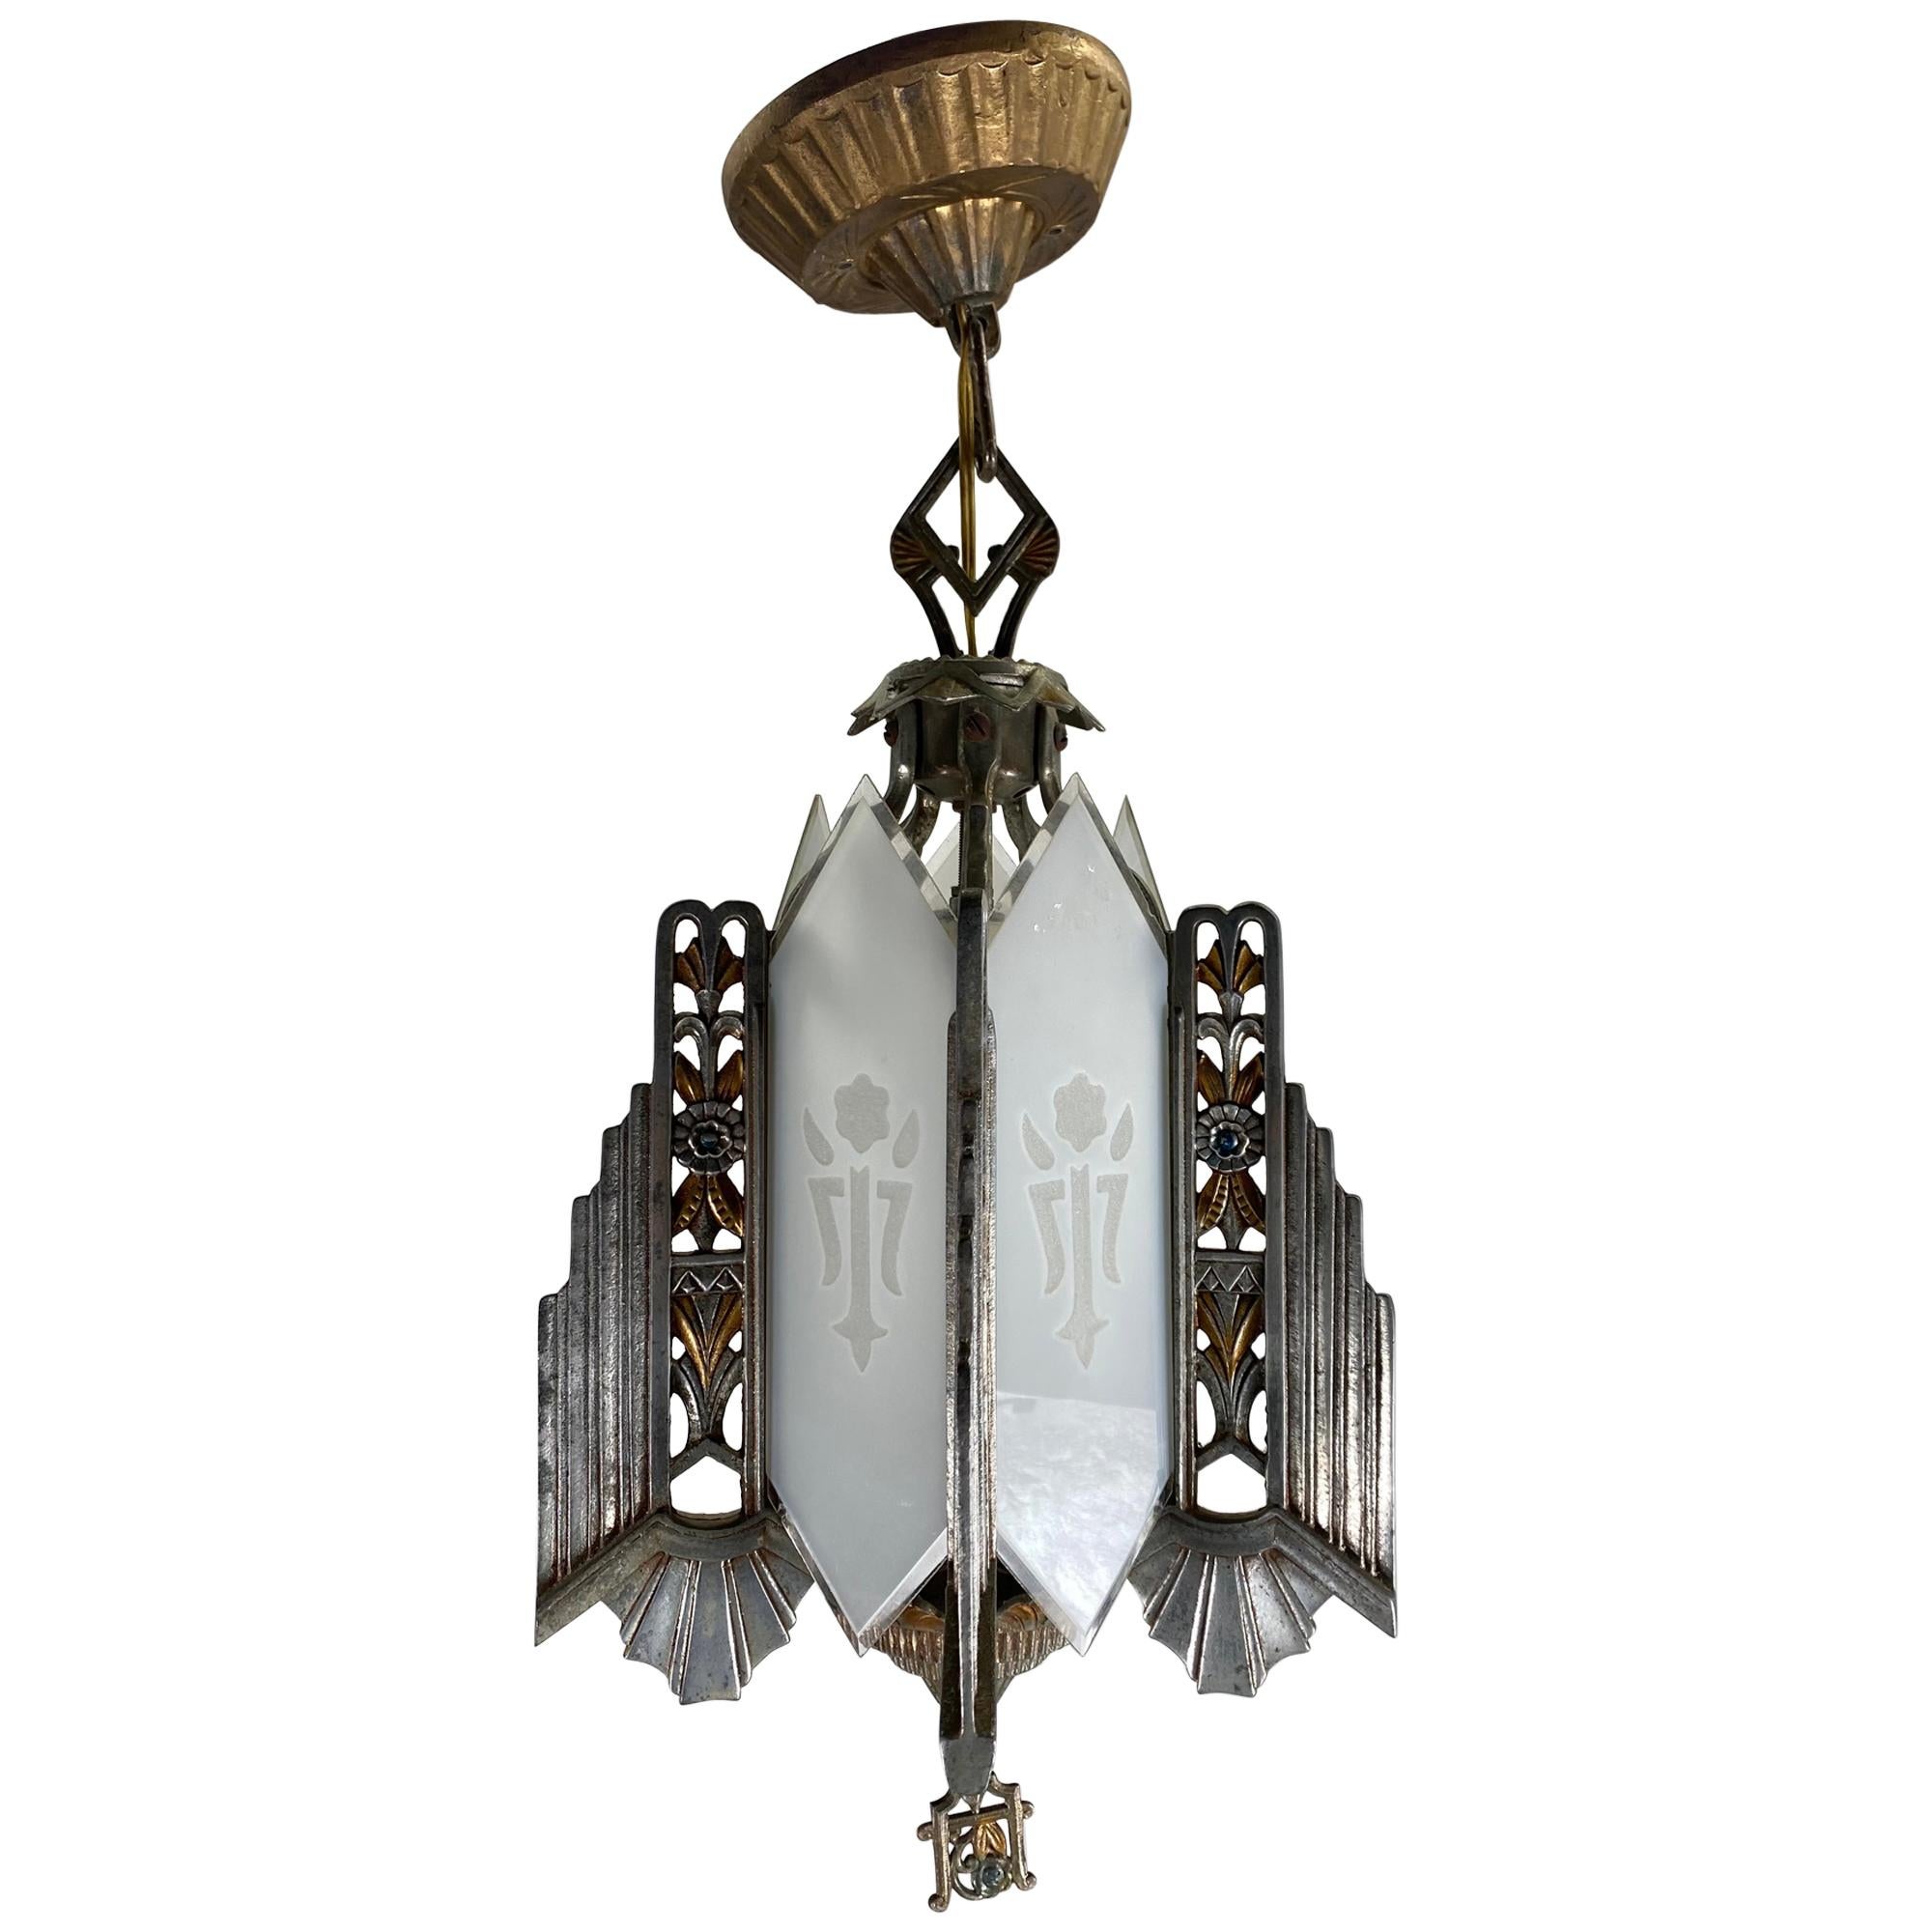 Stylized 1930s Art Deco Metal and Glass Hanging Pendant Chandelier by Markel